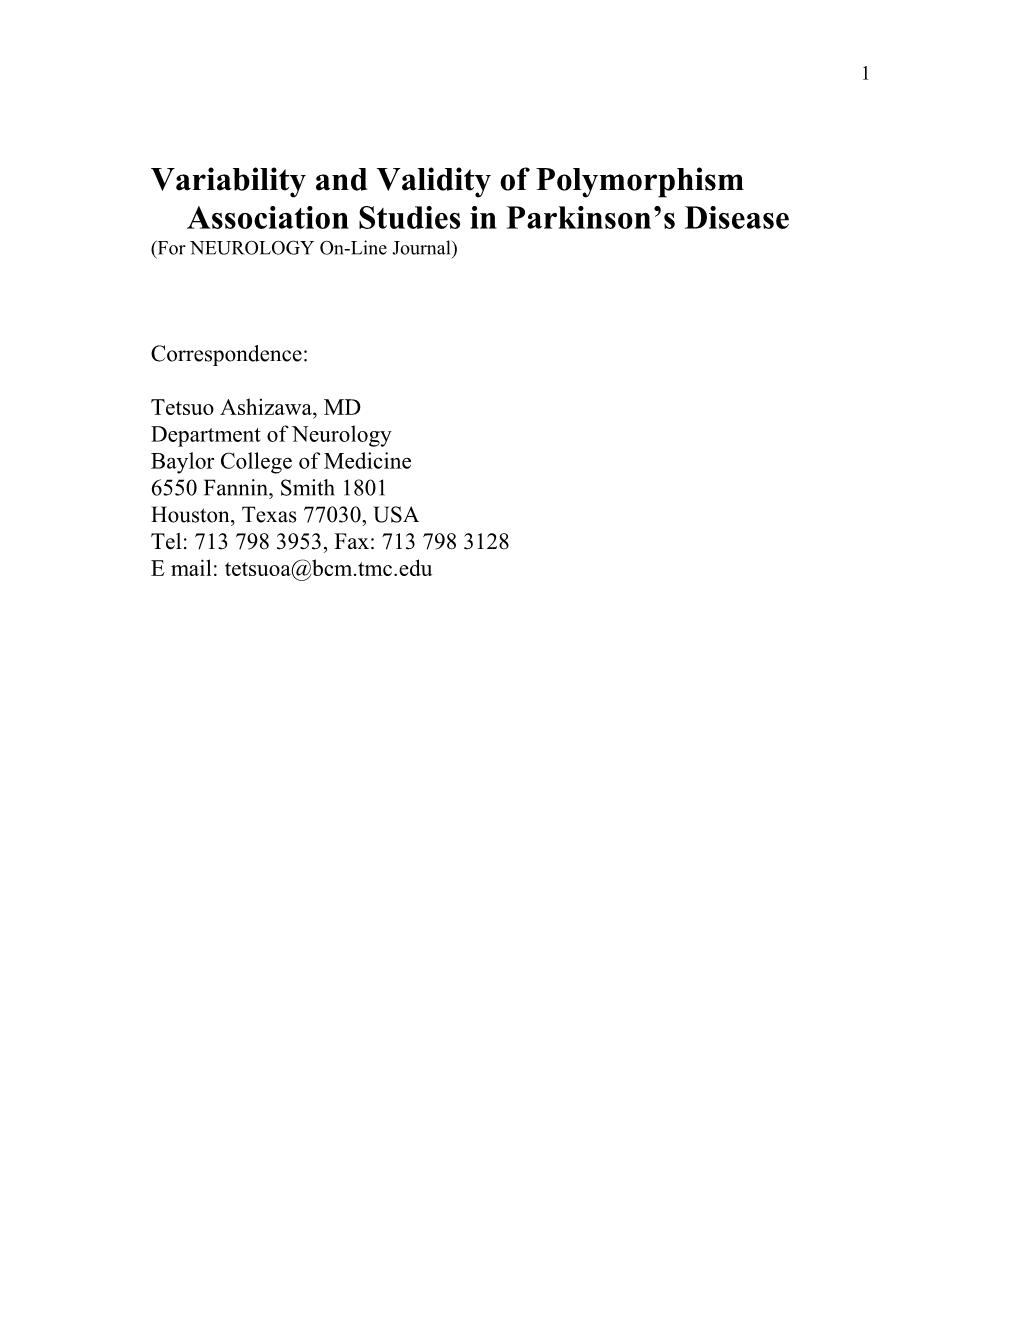 Variability and Validity of Polymorphism Association Studies in Parkinson S Disease